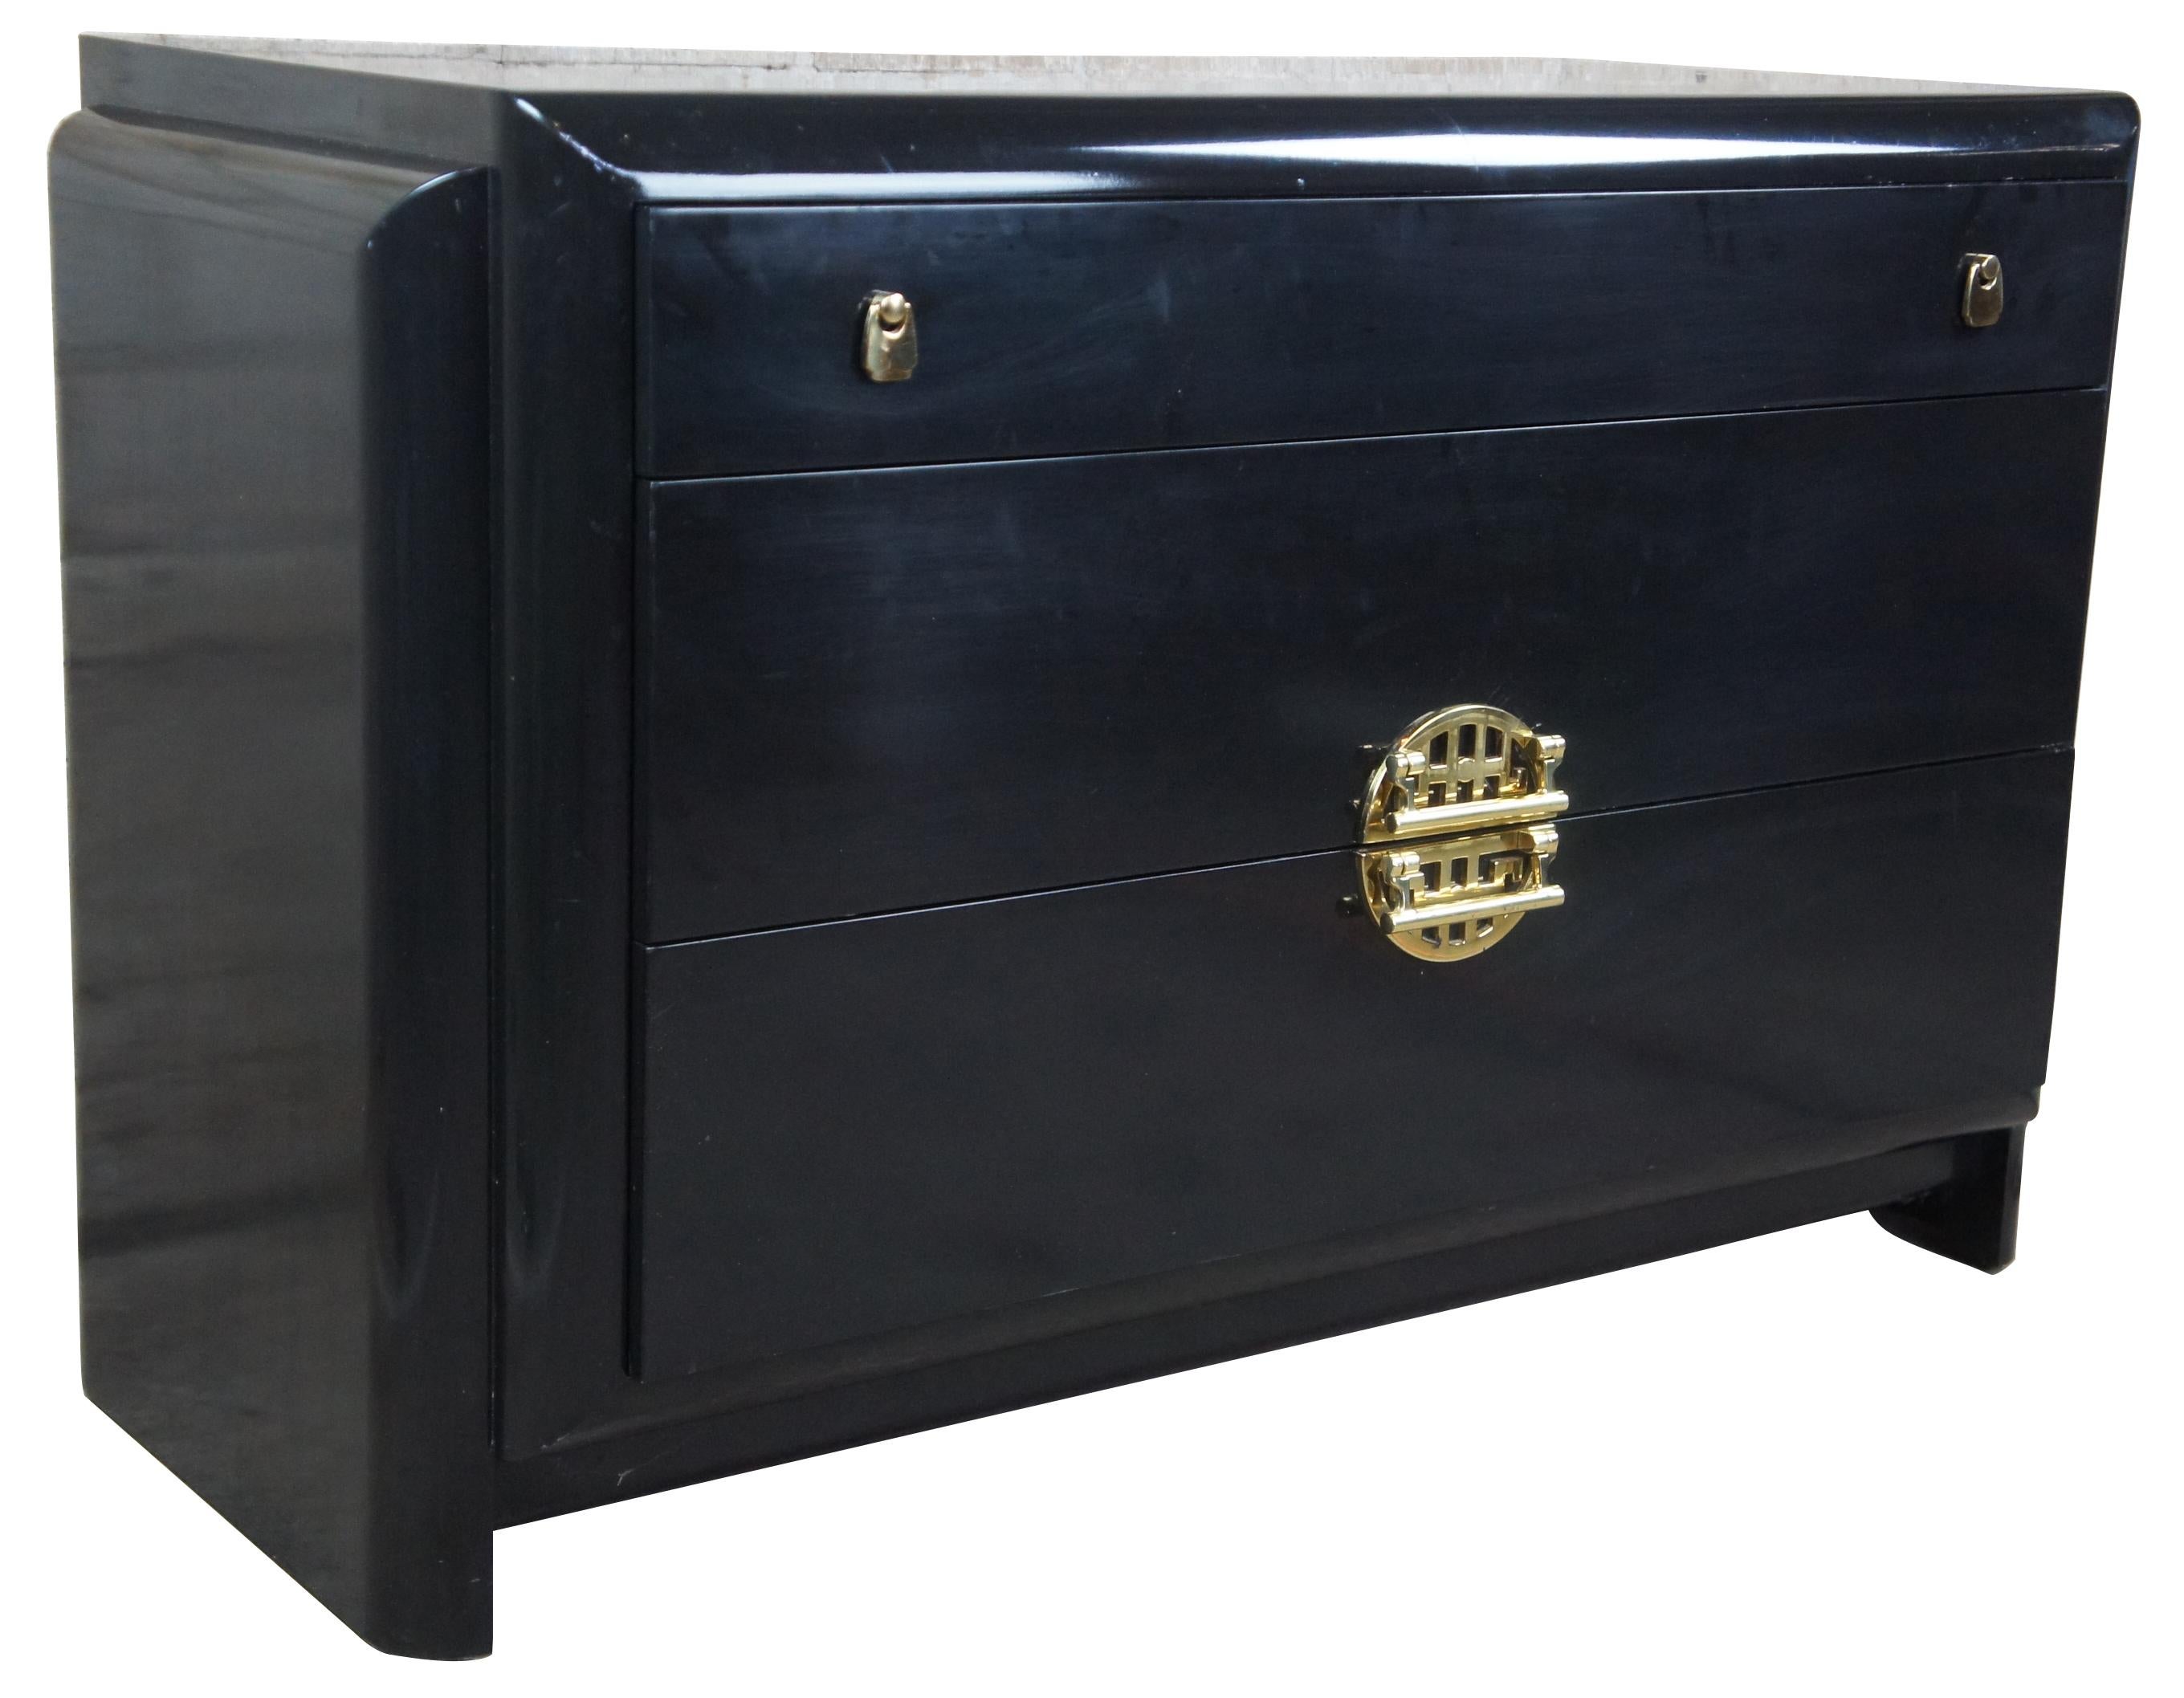 Mid-20th century modern dresser by Romweber Furniture. Features an Asian inspired design with black lacquer finish and nickel polished hardware with oriental motif. Measures: 44